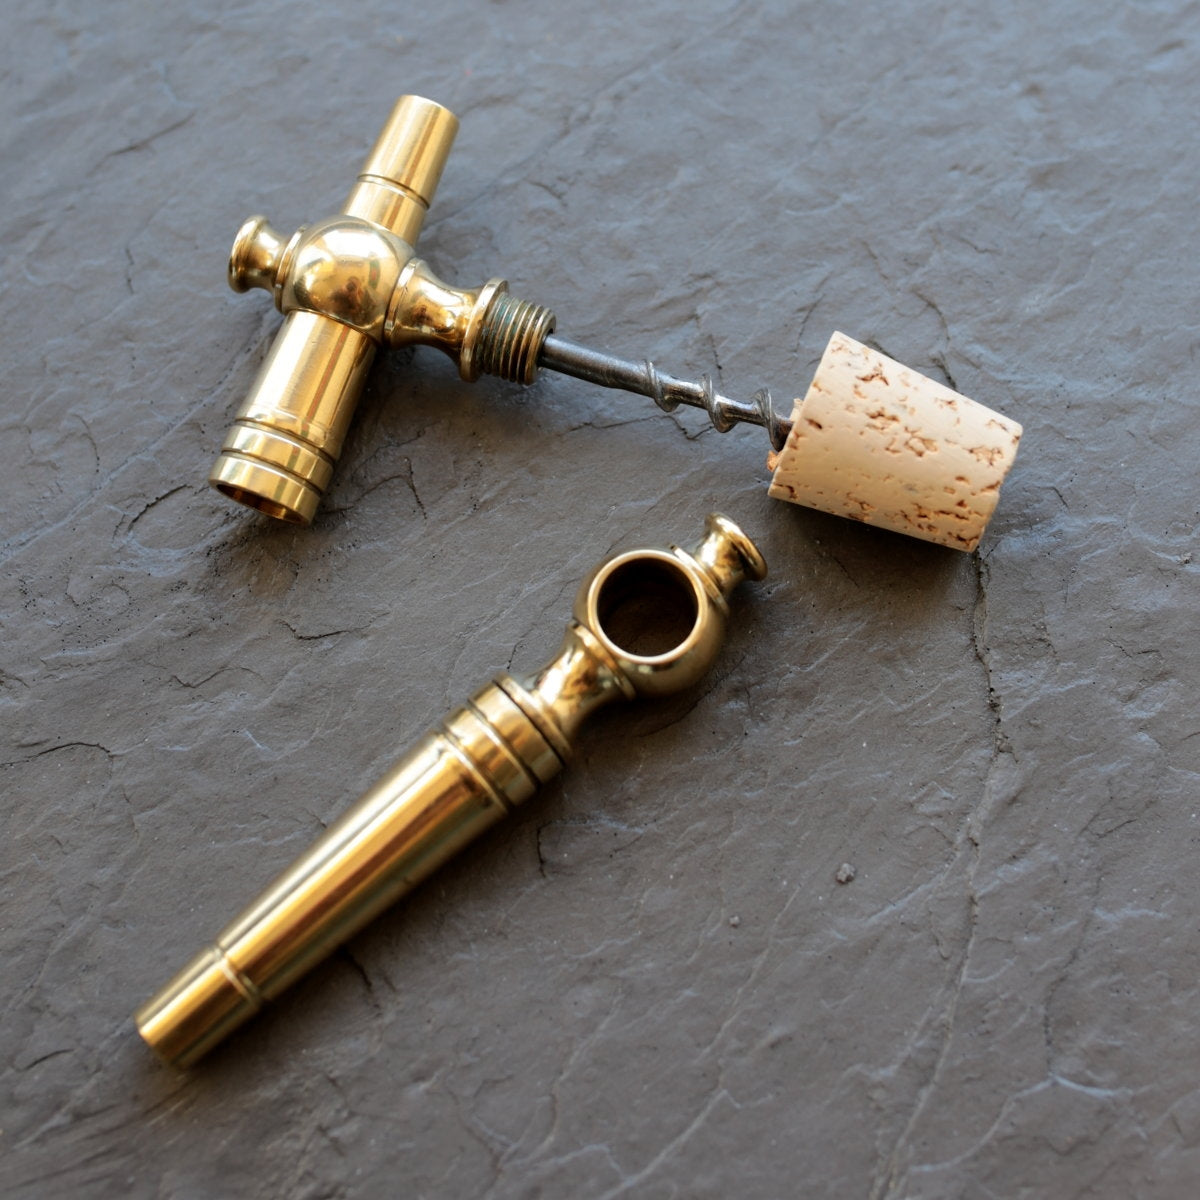 Brass bottle and wine opener - Puttino - classic style